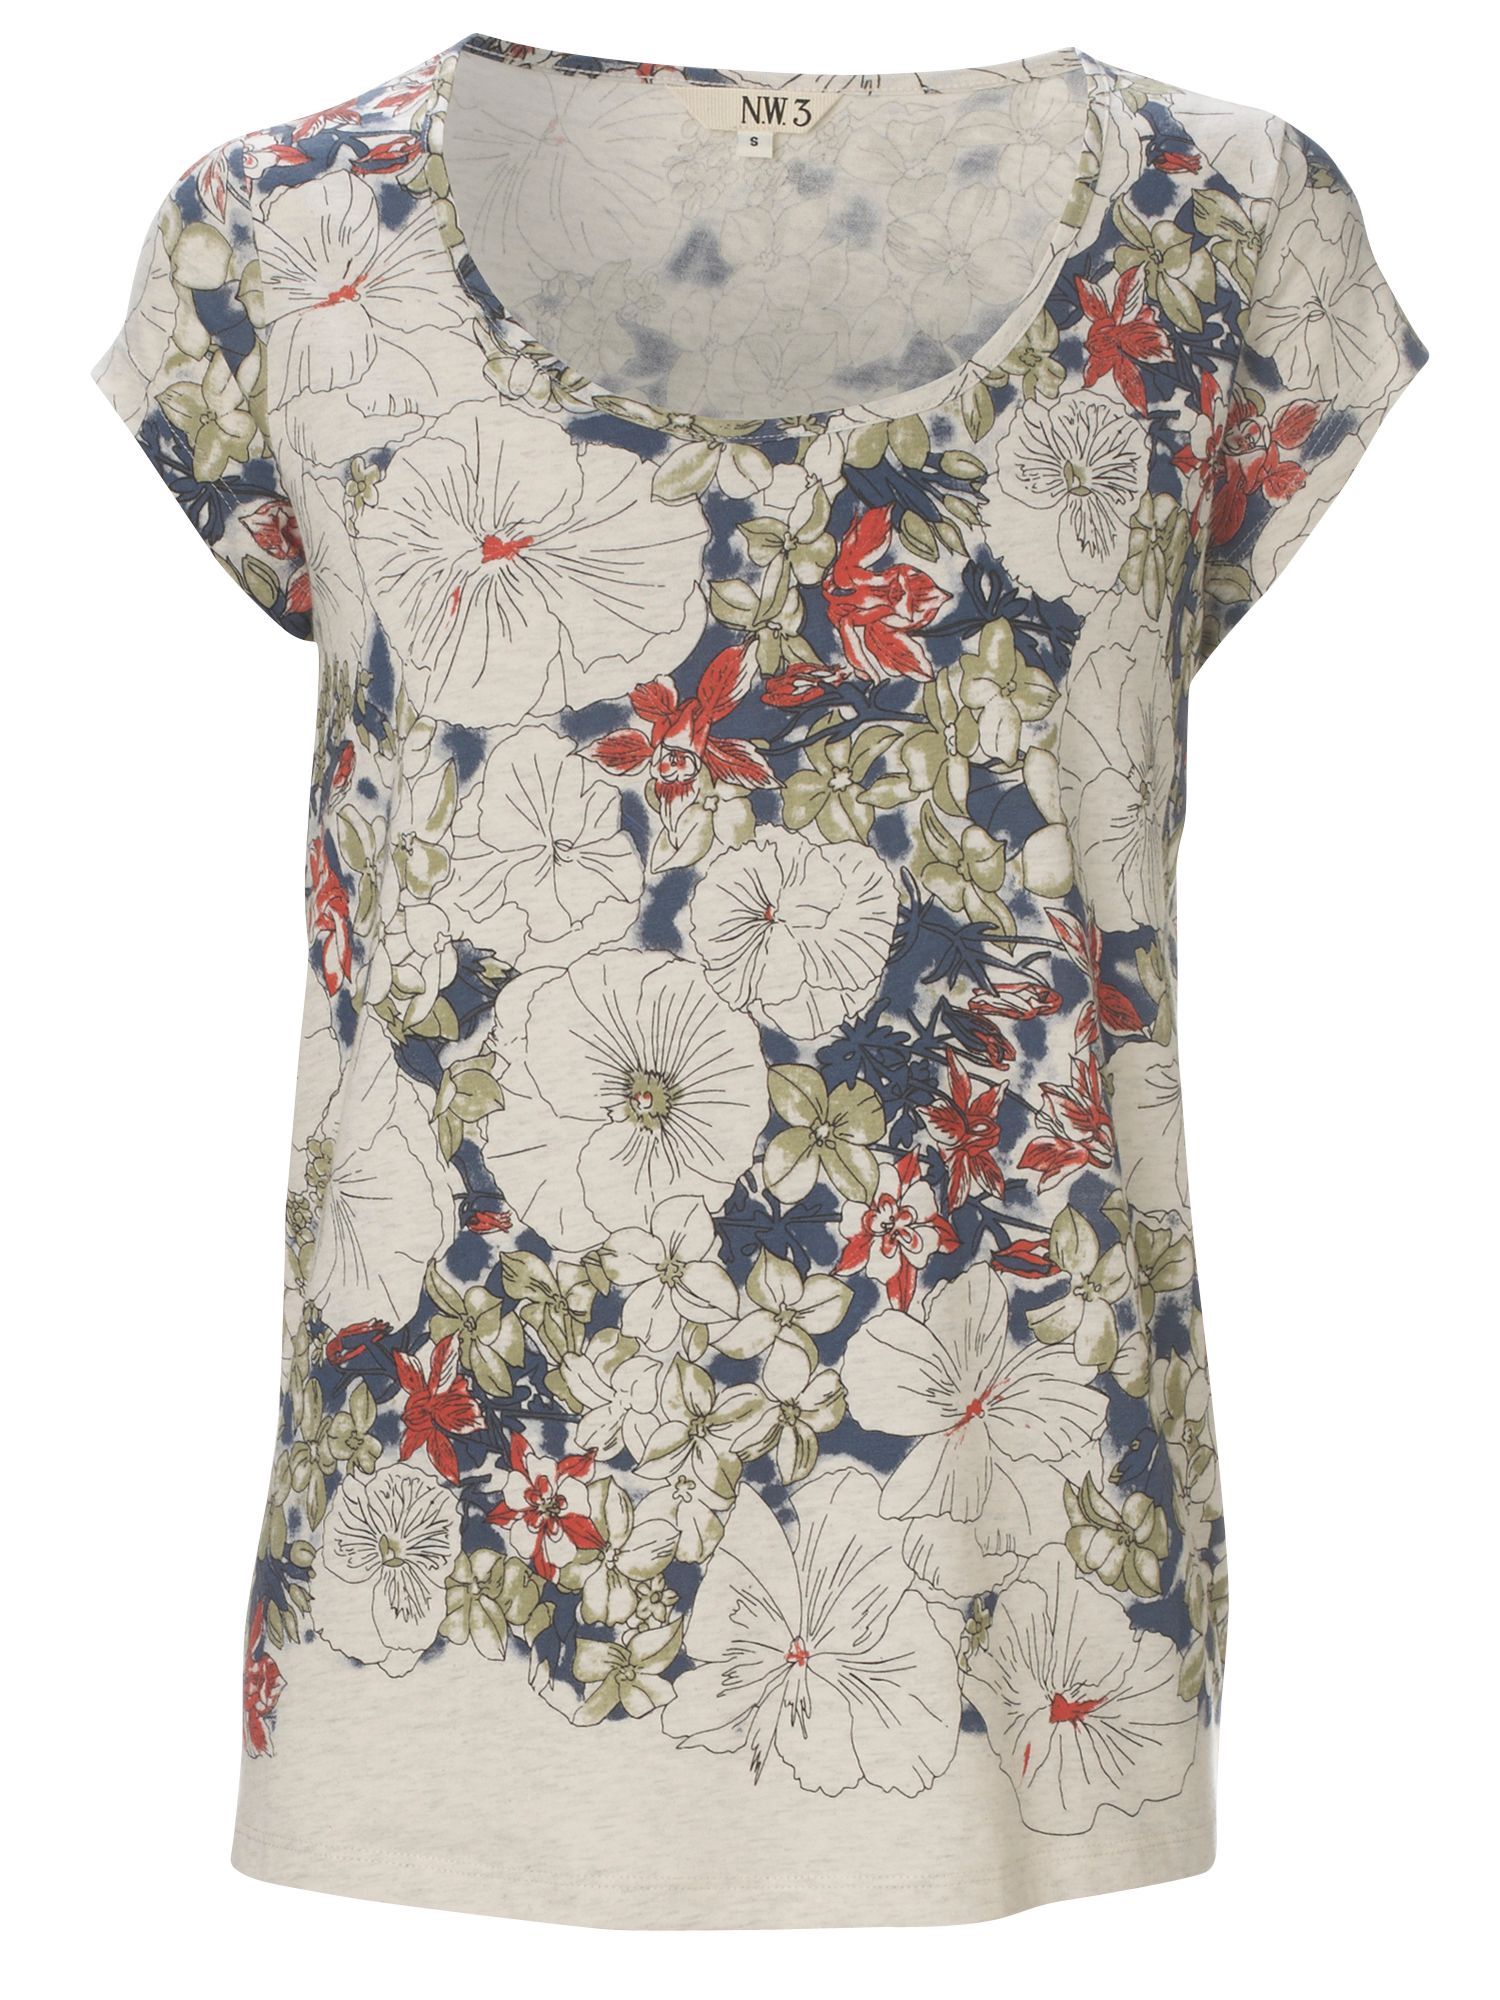 NW3 Floral Print T-Shirt, Multi